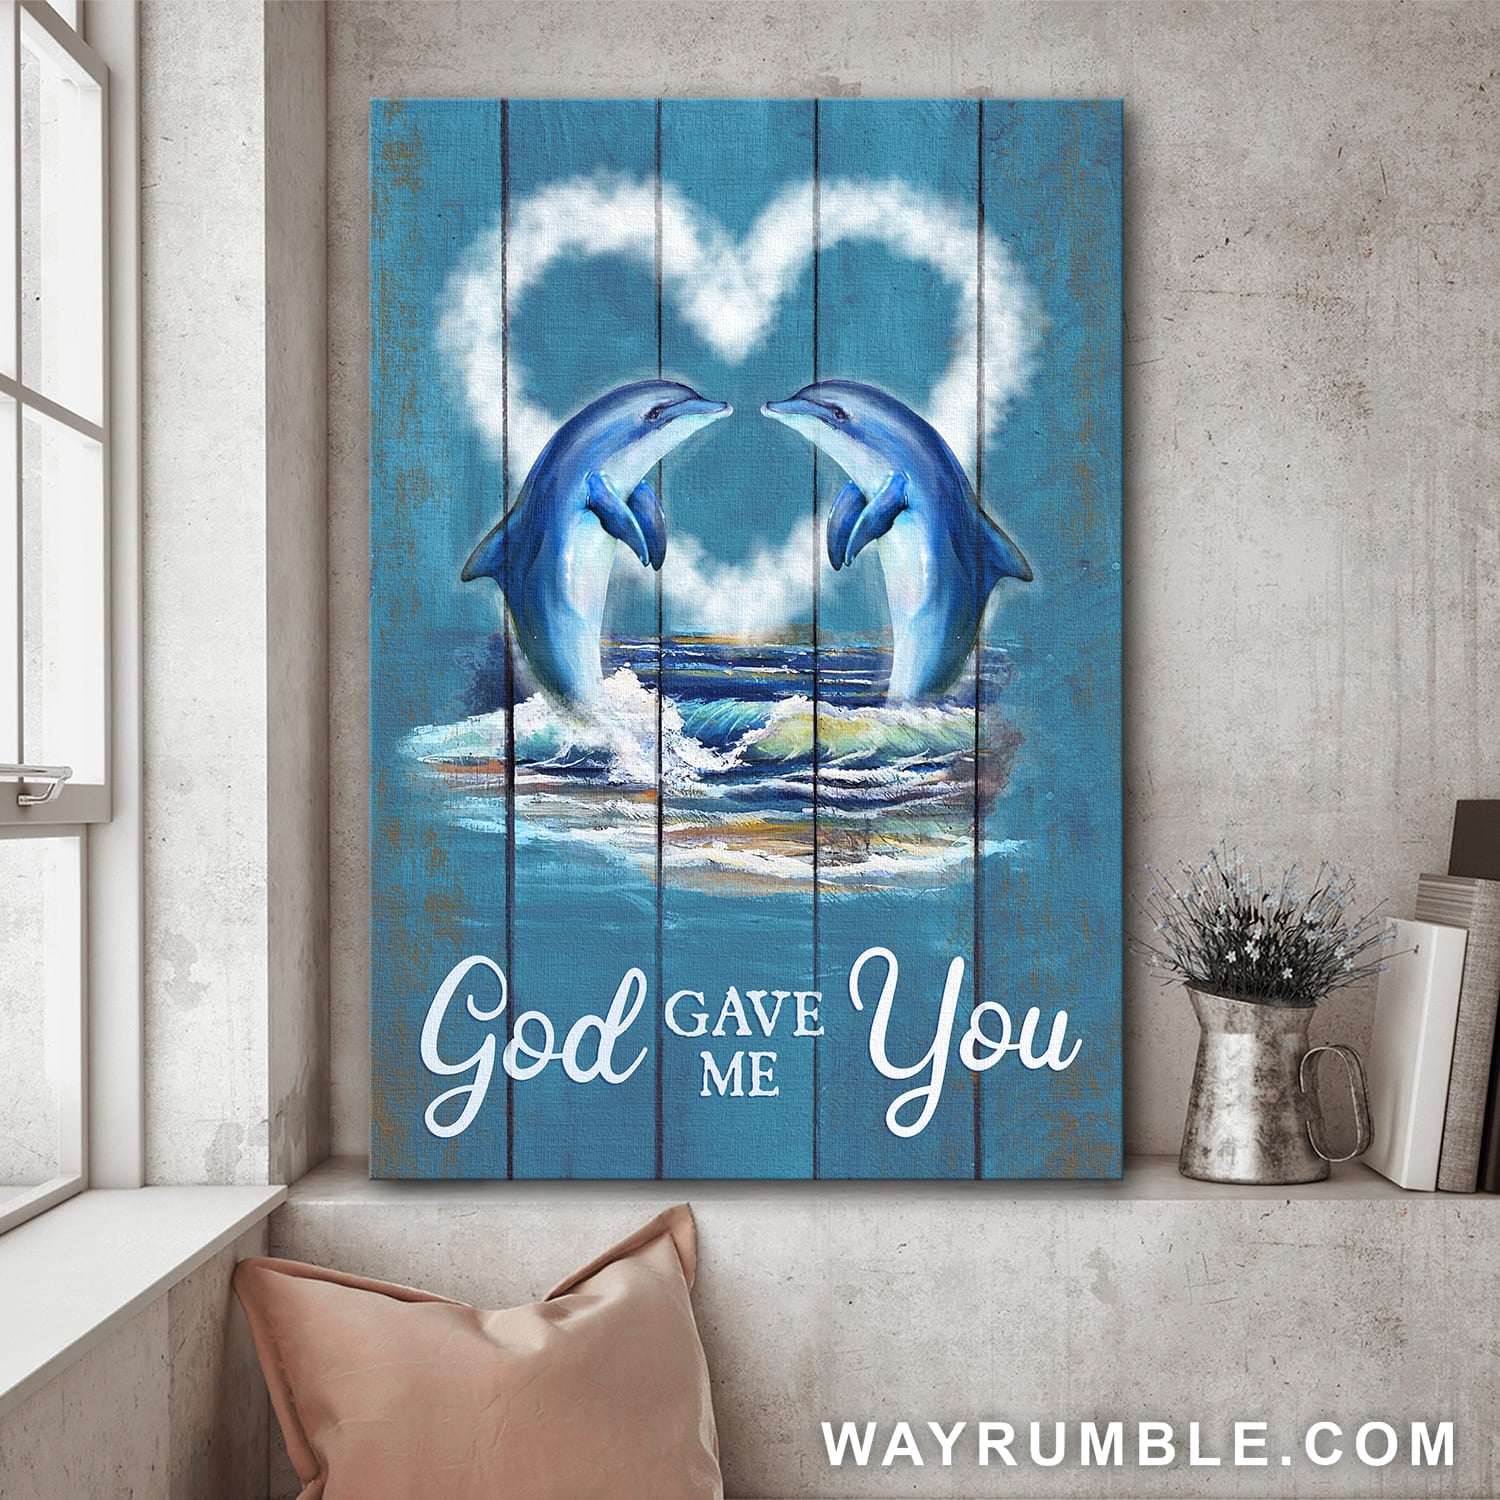 Dolphin painting, White heart, God gave me you - Jesus Portrait Canvas Prints, Wall Art